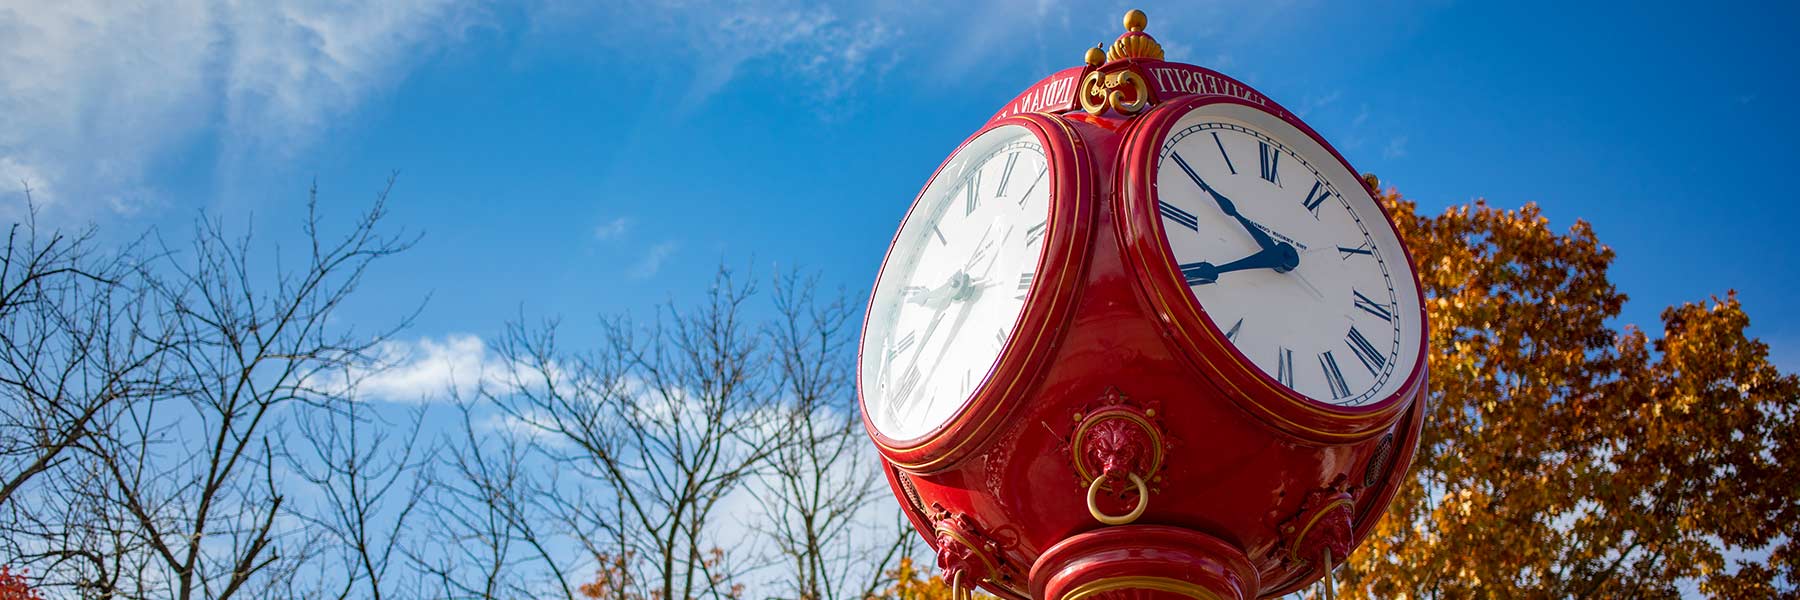 Looking up at ornate red metal clock with fall leaves and sky in the background.